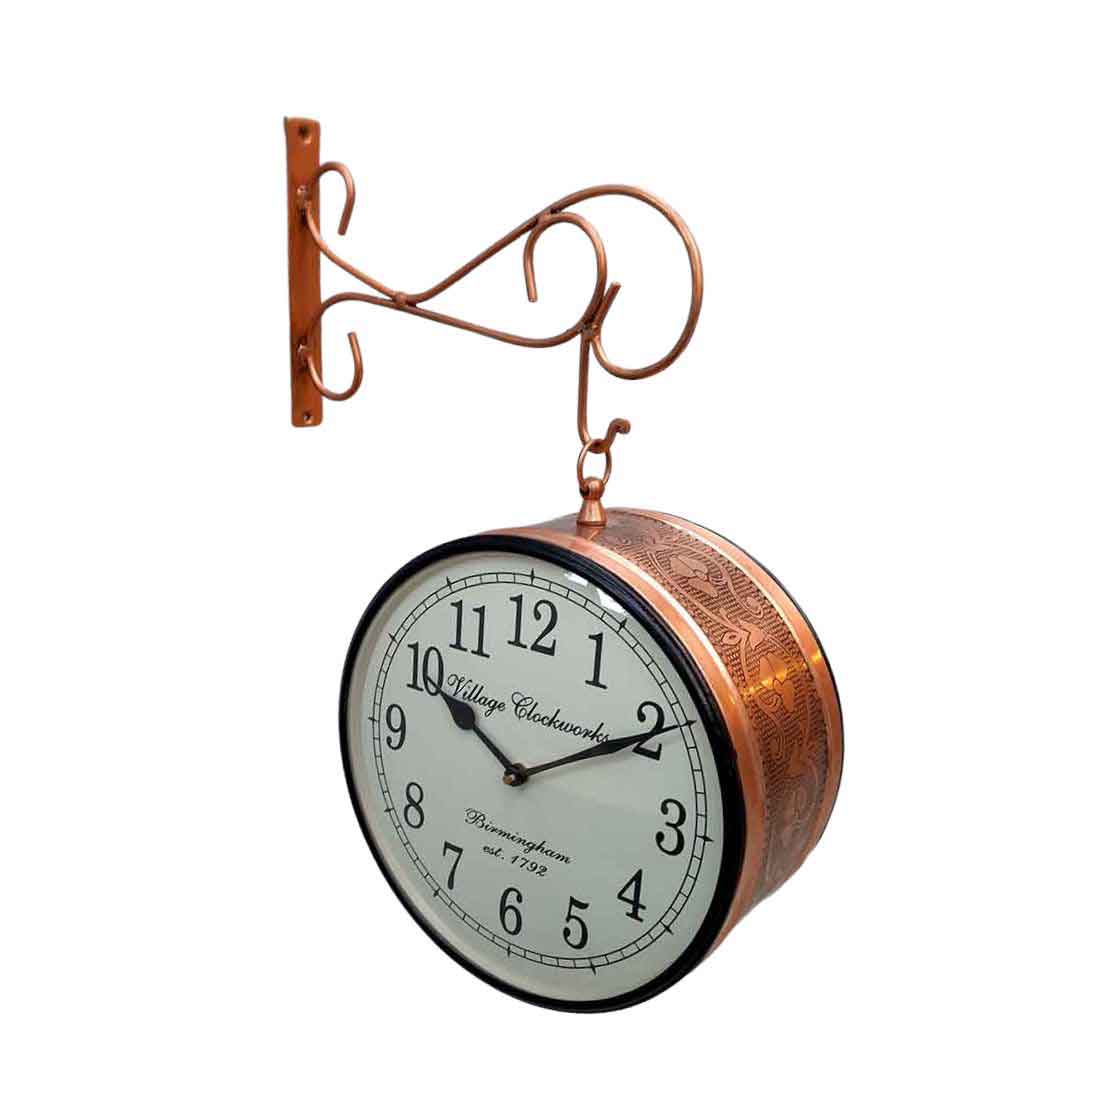 Railway Clocks - Double Sided | Victorian Station Wall Hanging Clock | Vintage Platform Watch - for Home, Living Room, Office Decor & Gifts - 10 Inch